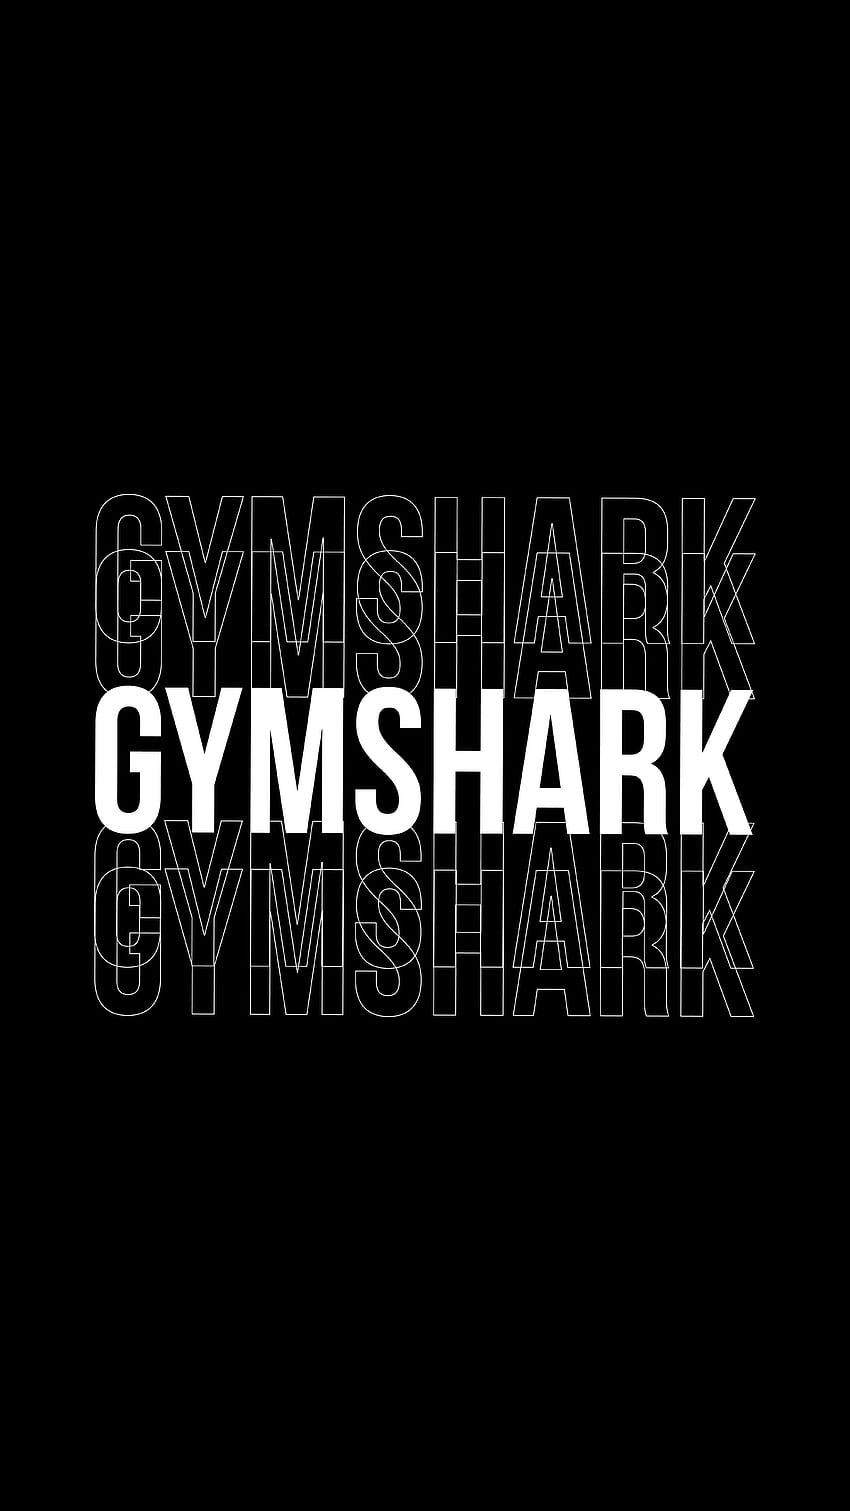 Download wallpapers Gymshark logo blue background Gymshark 3d logo 3d  art Gymshark brands logo blue 3d Gymshark logo for desktop with  resolution 2560x1600 High Quality HD pictures wallpapers